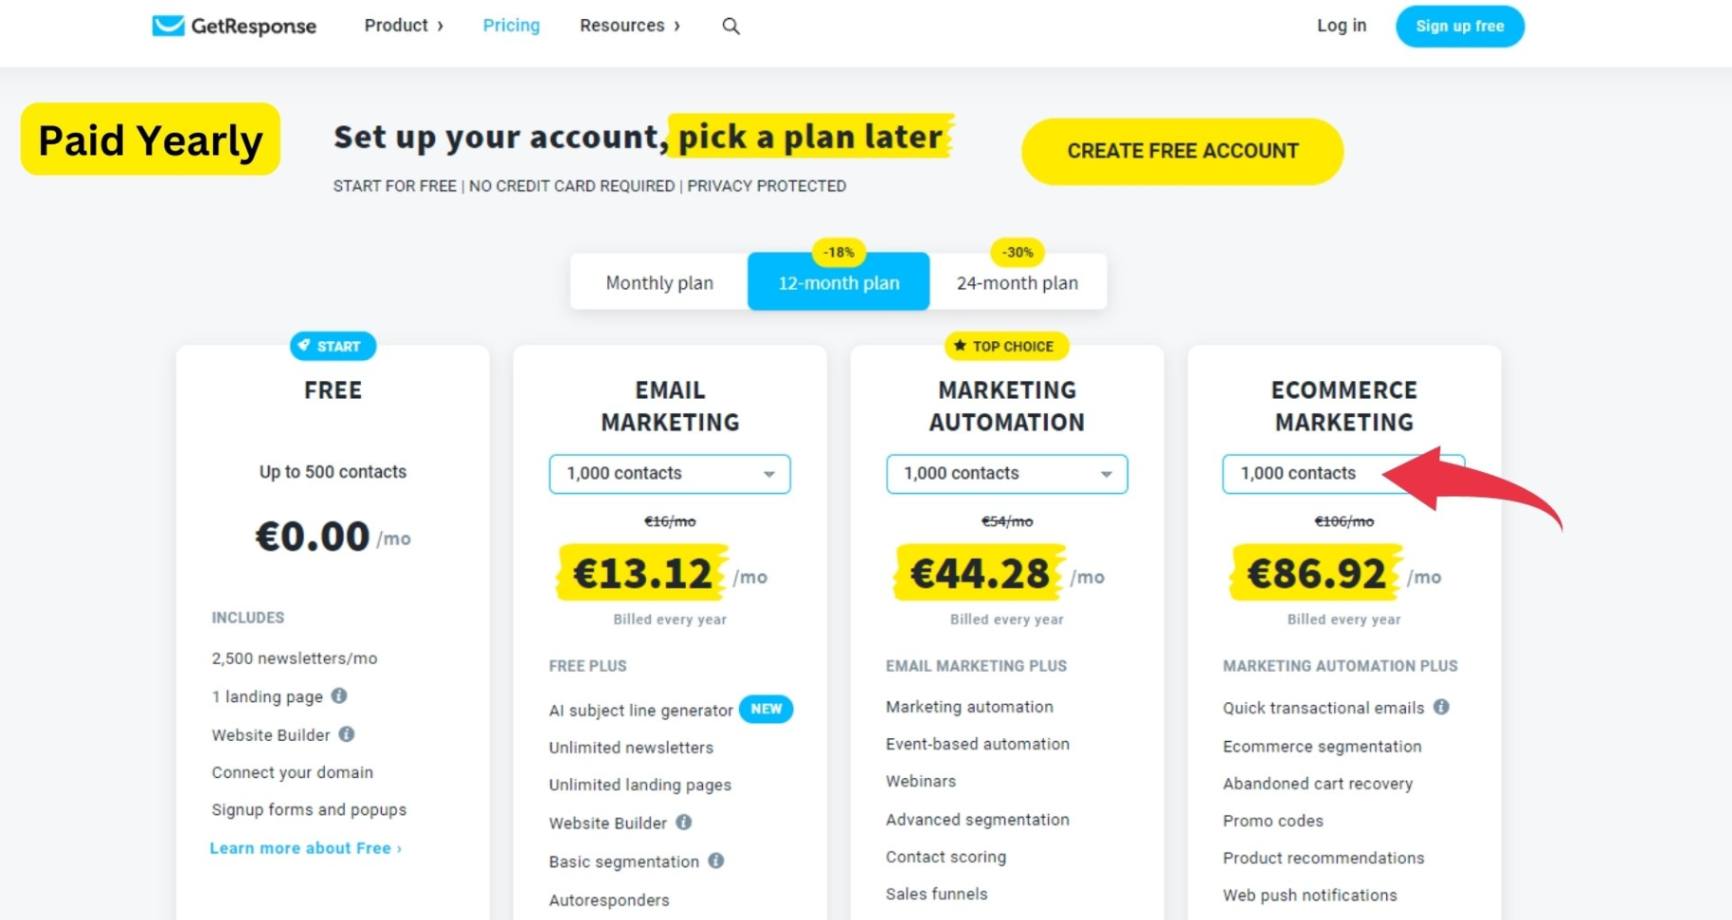 getresponse compare plans and pricing